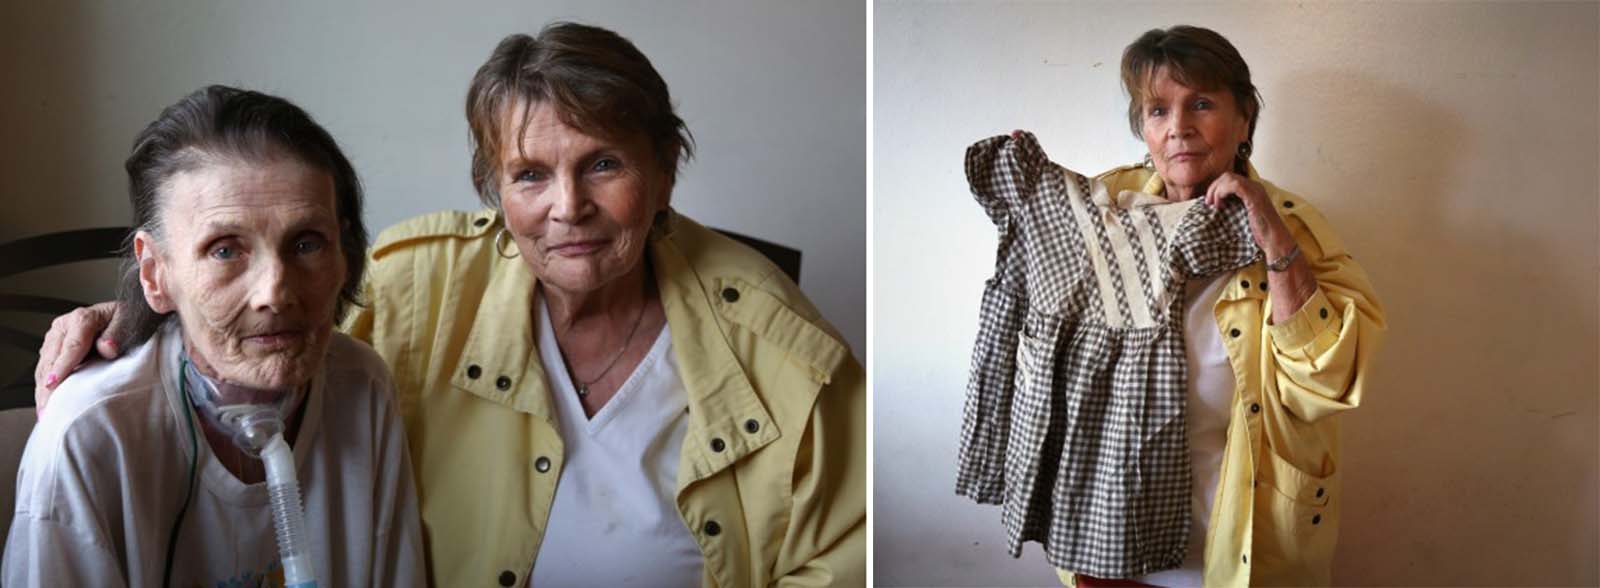 (Left) Sue Ellen and her sister RaeAnn Mills reunited at Chalufoux's home in Hammond. (Right) RaeAnn Mills holds the dress she was sold in as a child. It is the only physical item she has from the time with her birth mother. Photos taken in 2013.